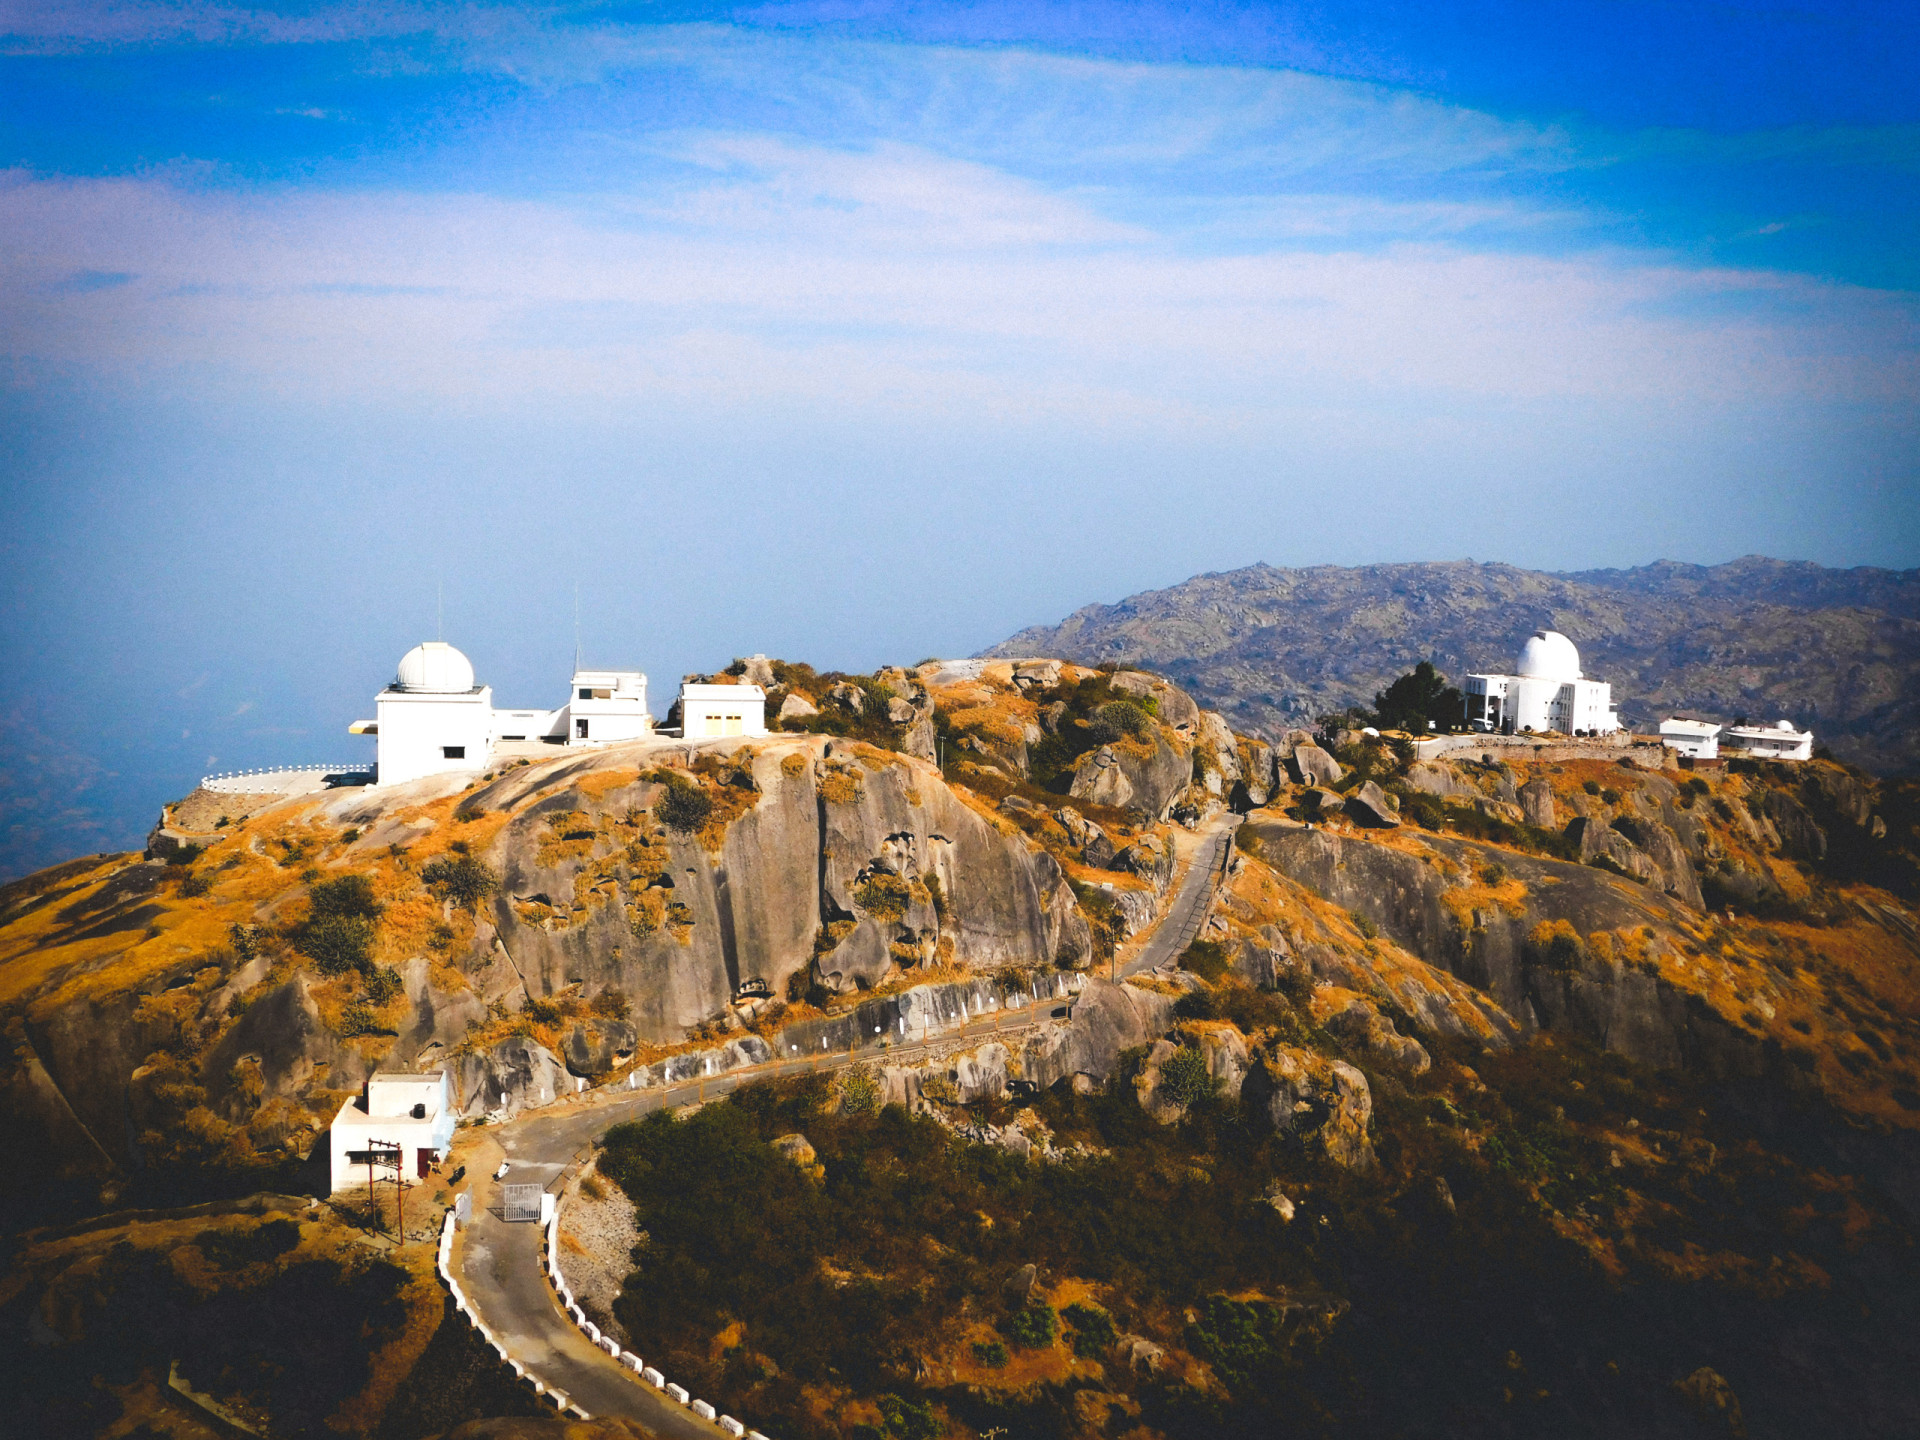 Remote Mount Abu is tucked away in the Aravalli mountain range in Rajasthan and serves as a lofty getaway from the sultry desert climate this northwestern Indian state is notorious for. The destination sits amid lush, green forested hills on the highest peak on the range, Guru Shikhar, at 1,722 m (5,650 ft) above sea level.